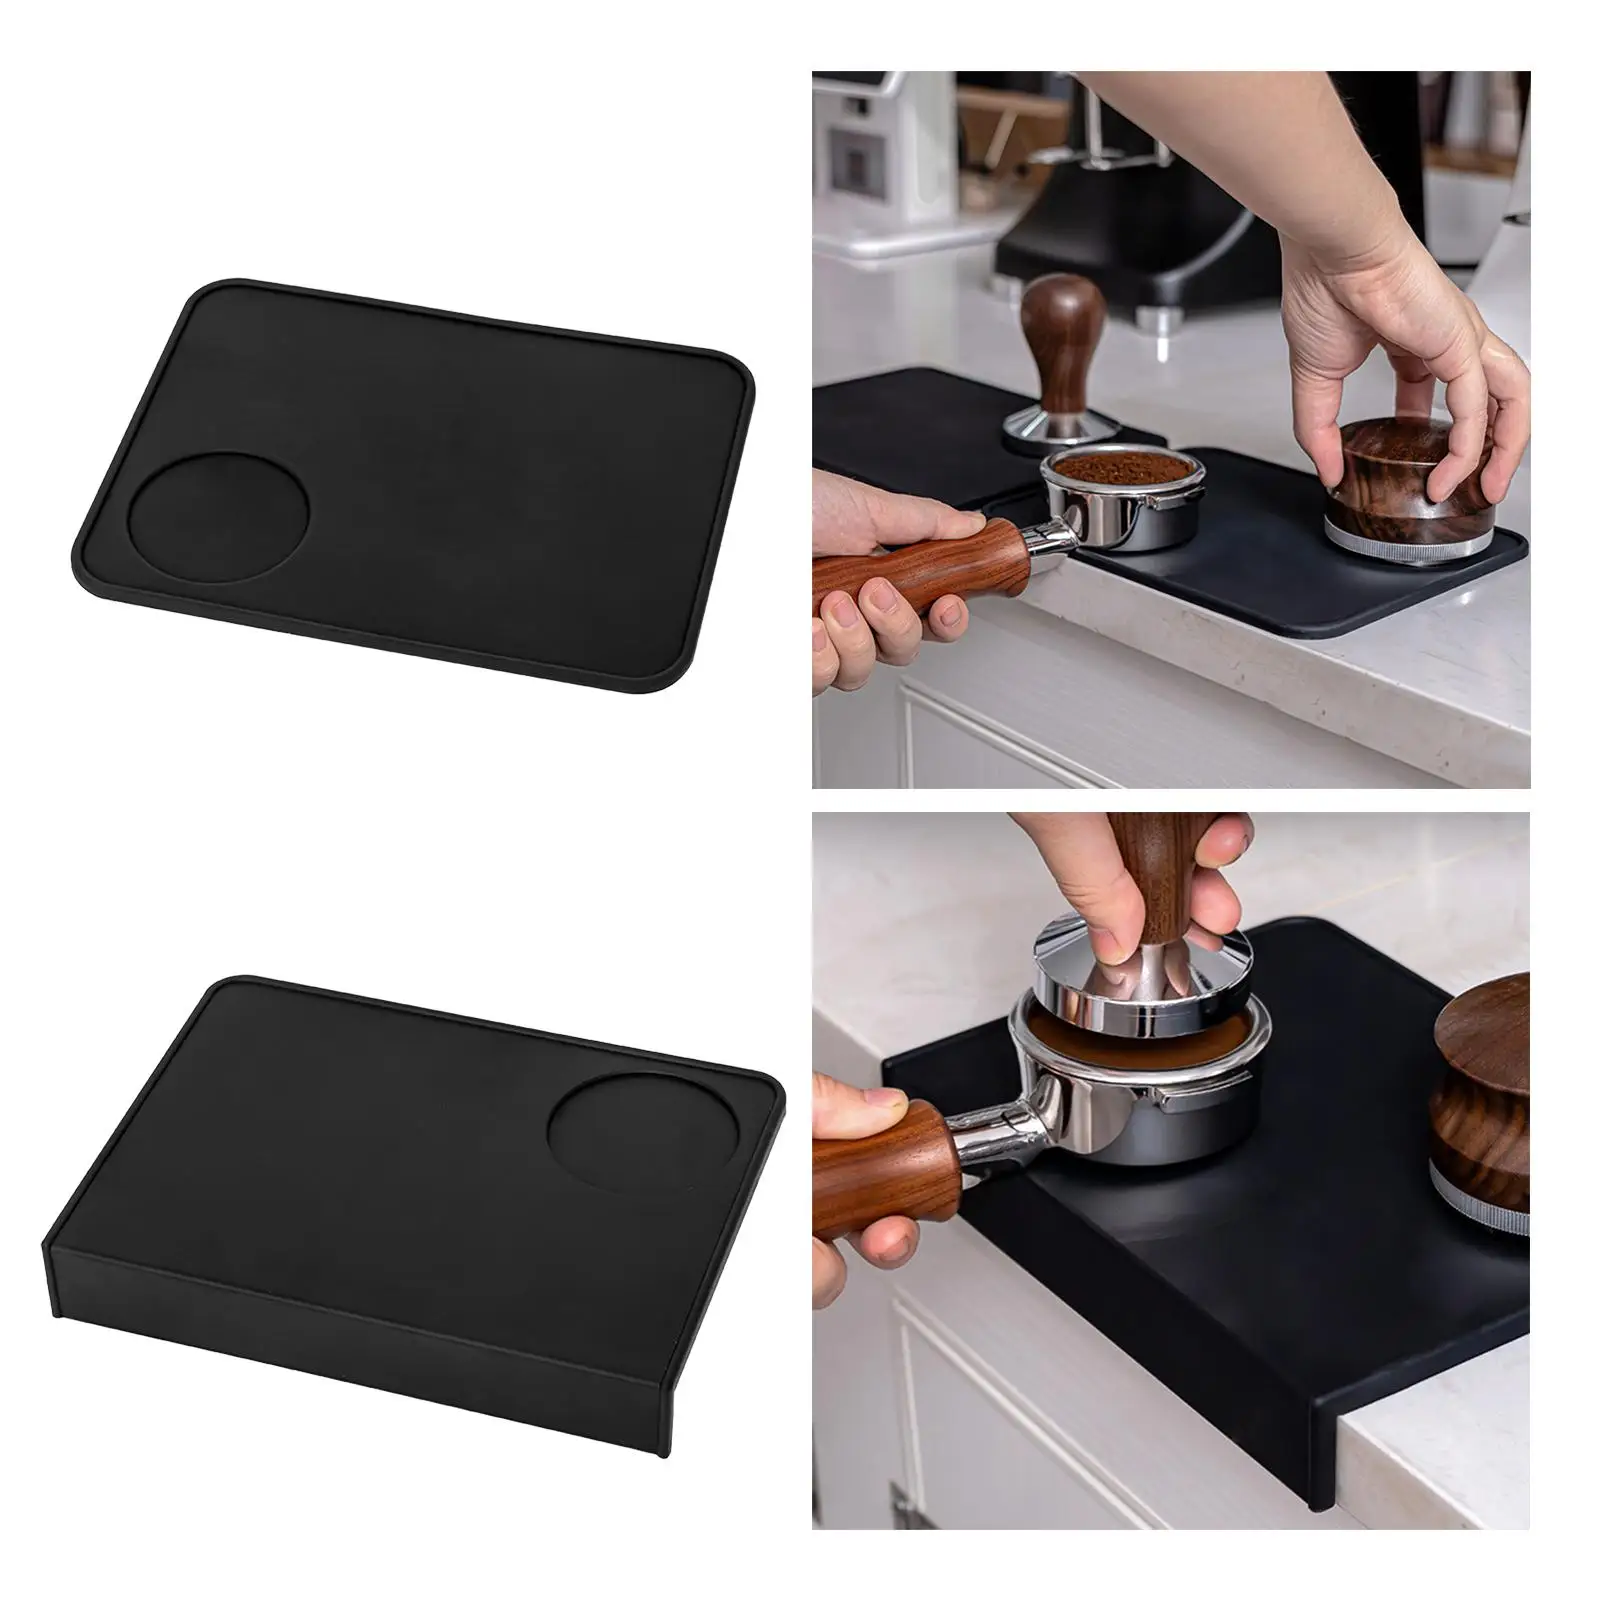 Coffee Tamper Mat Nonslip Wear Resistant Heat Resistant Coffee Utensils Soft Professional for Kitchen Coffee Bar Countertop Home